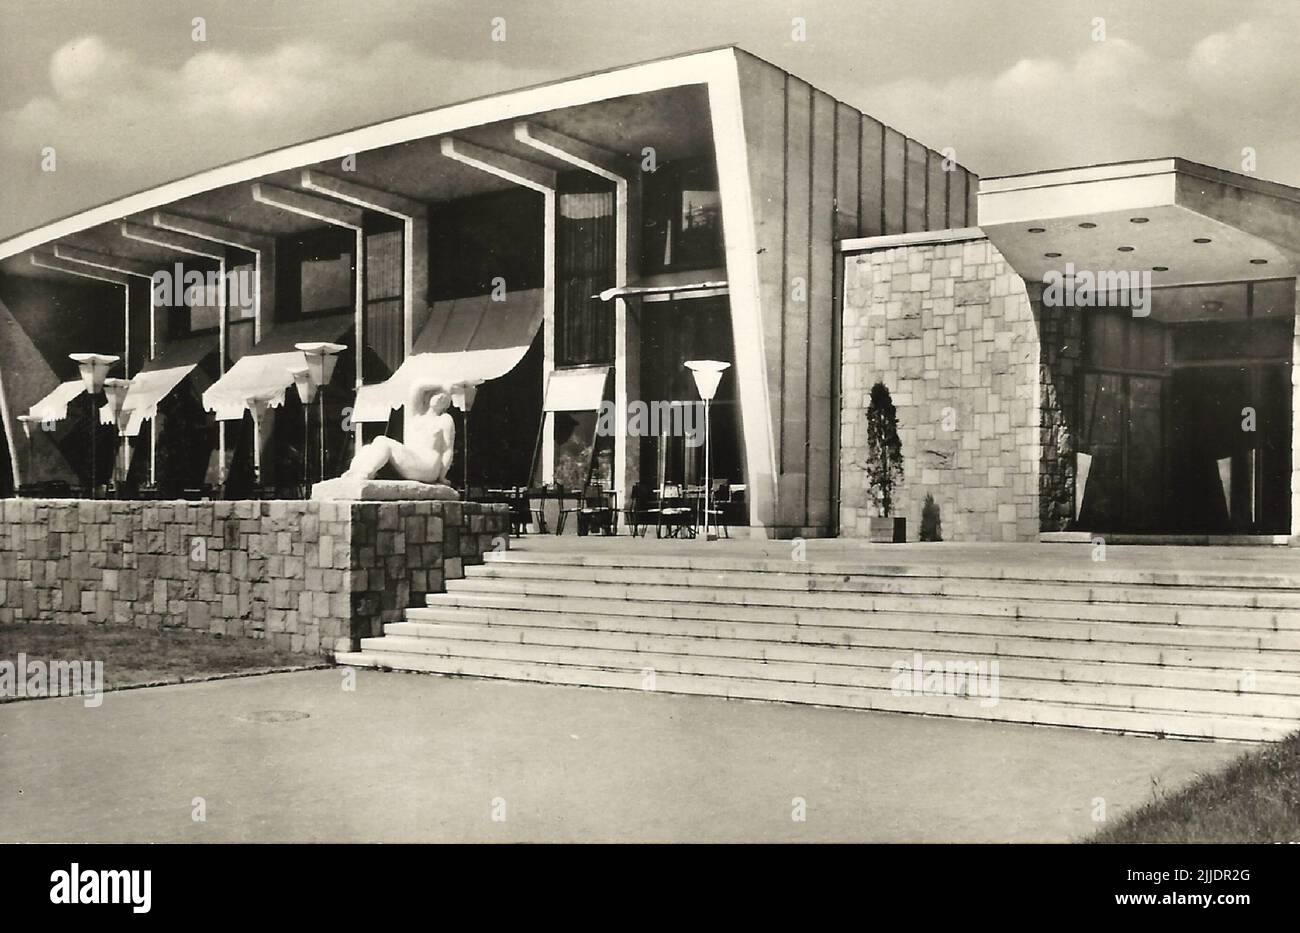 Olympics restaurant. Postcard of the Olimpia restaurant in Pécs. The Local History Collection of Csorba Gyz Könyvtár Library has been collecting photos and postcards related to Baranya County since January 1966. According to the data updated on 1st February 2016, the collection consists of 11,565 copies. As the result of the digitisation project that started in 2012, the Collection includes about 59,000 black-and-white and coloured records of different sizes and types, which are searchable through the electronic catalogue. The famous postcard collector Tibor Endre Tóth has procured a postcard- Stock Photo